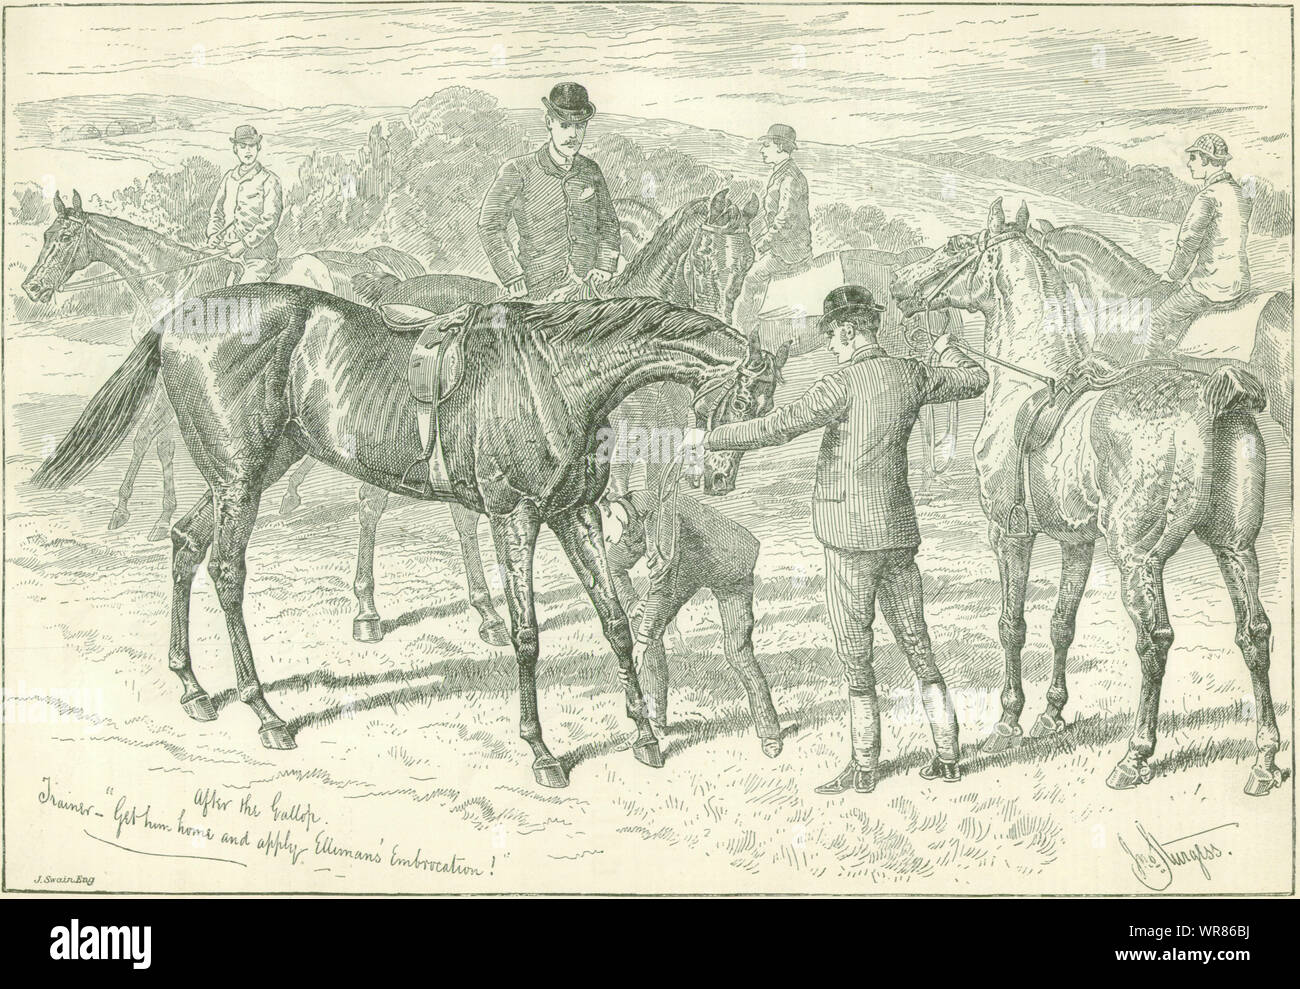 'Get him home & apply Elliman's Embrocation' Advert. Slough. Horses 1888 Stock Photo